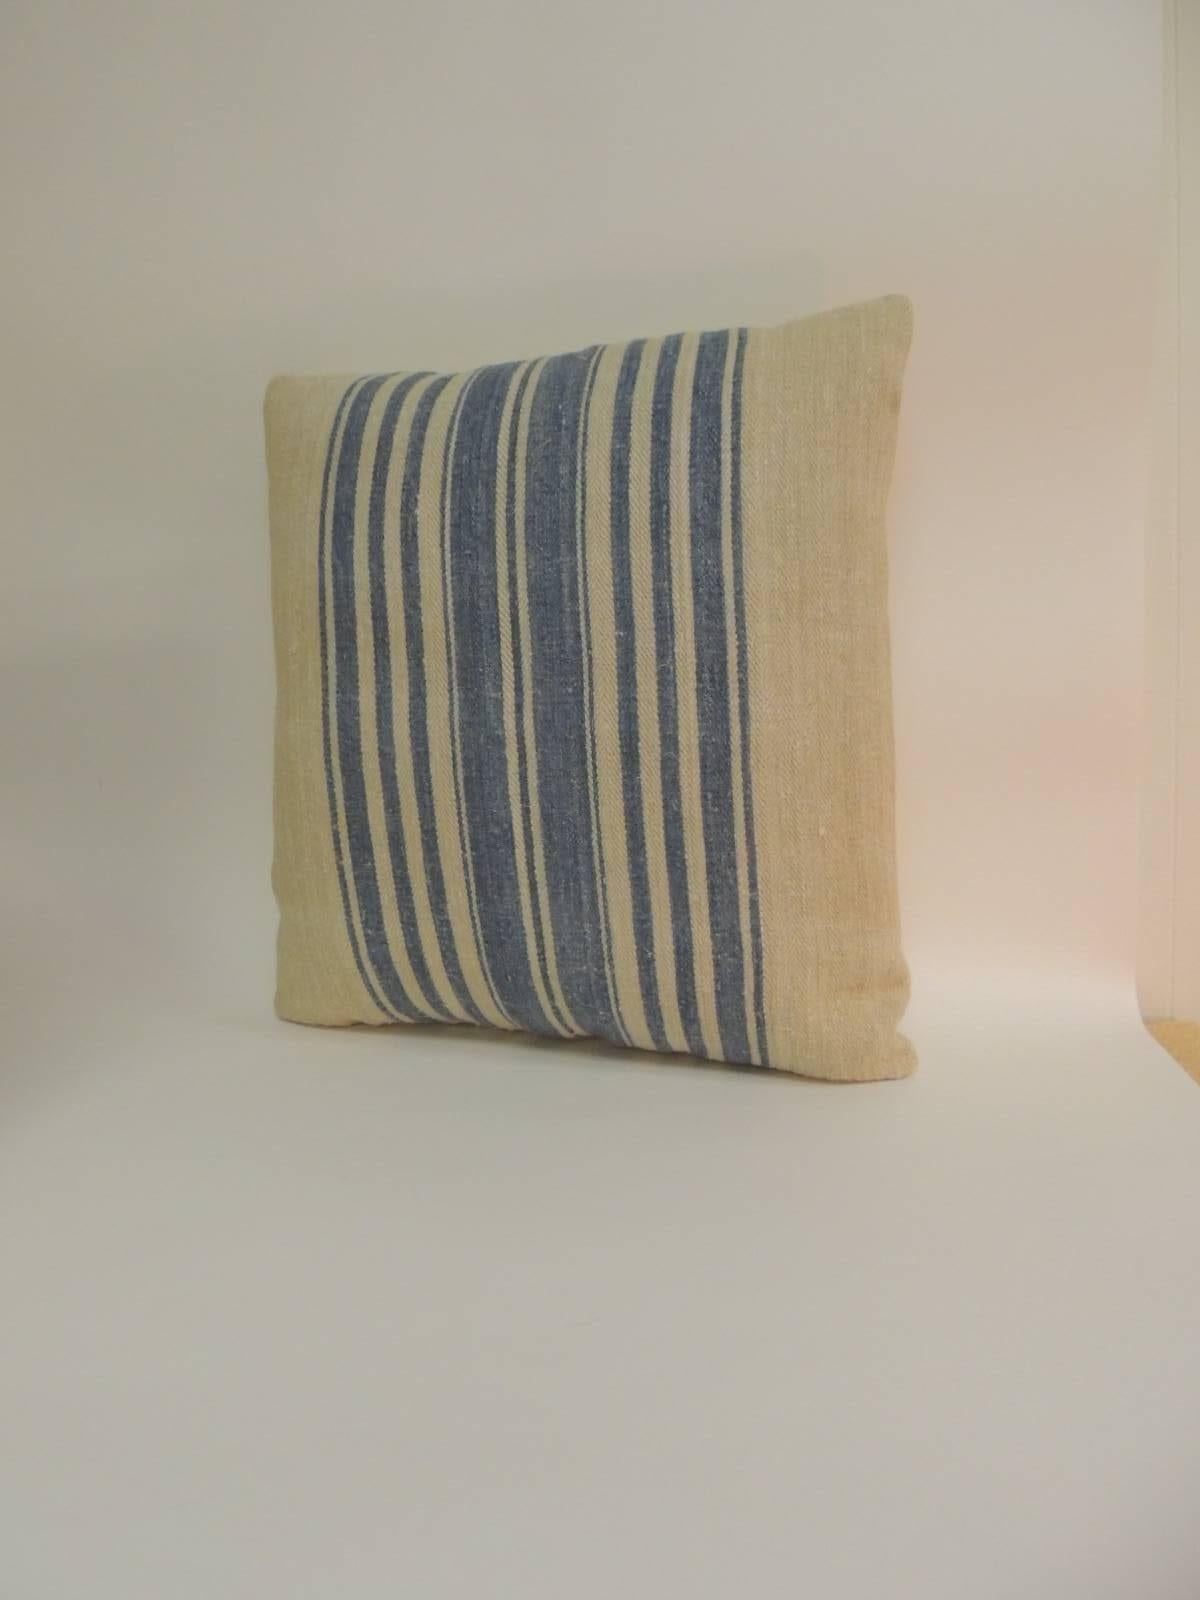 The antique textile in the front of these decorative pillows show vertical stripes 
with a chevron woven homespun textile. French decorative cushions 
finished with natural linen backings. In shades of blue, tan and natural. 
Throw pillows are